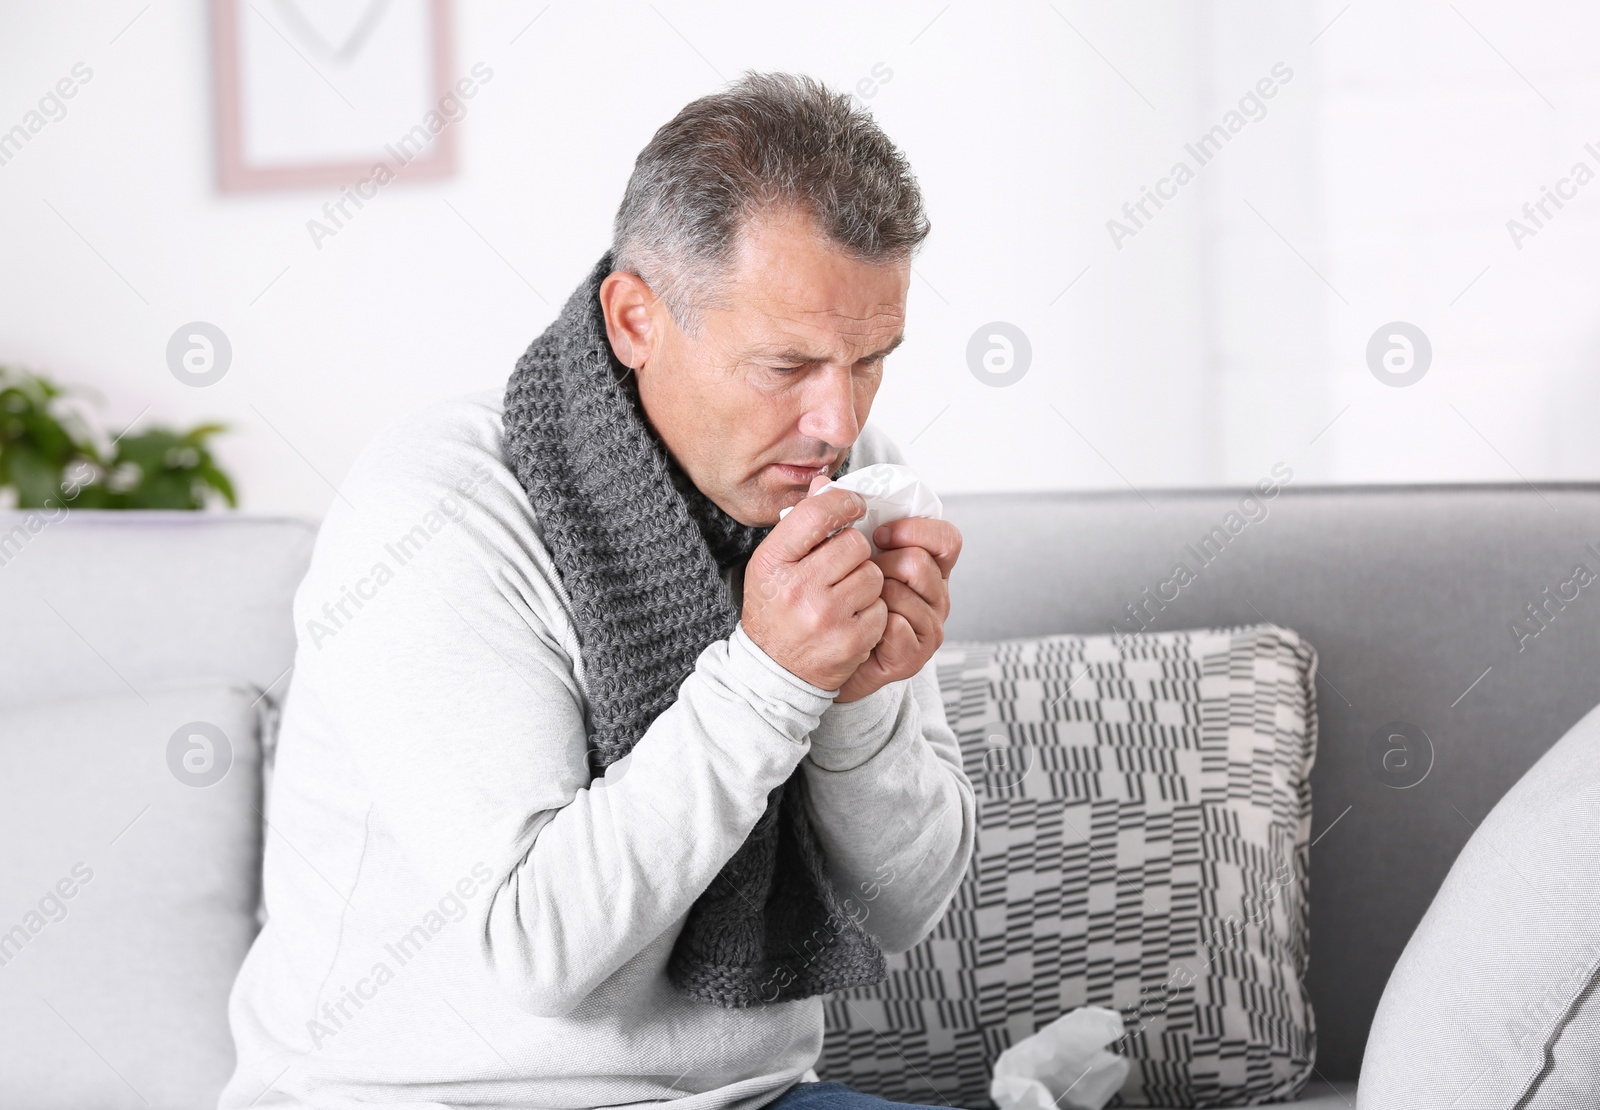 Photo of Man suffering from cough and cold on sofa at home